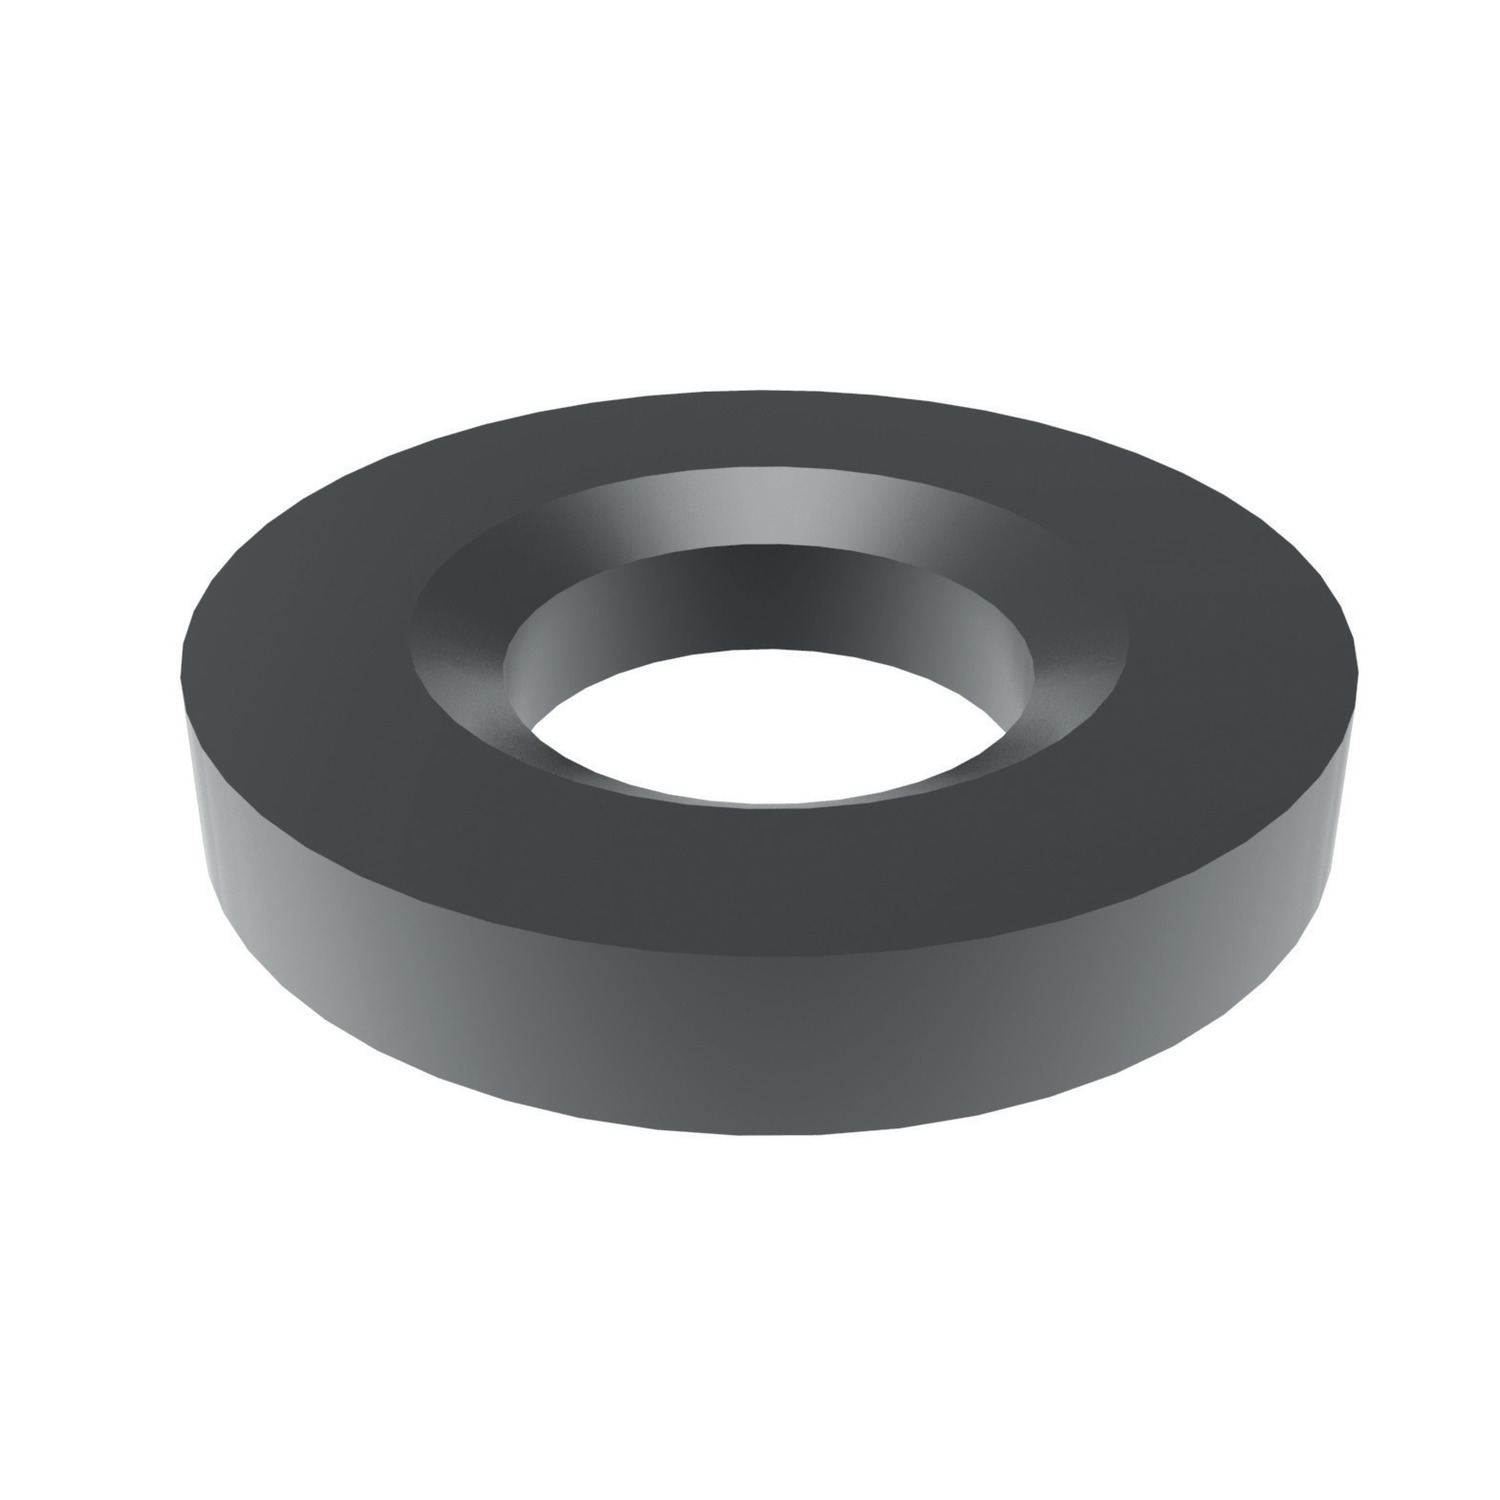 Dished Washers Tempered steel dished washes made to DIN 6319G. Punched, trued and tempered. Larger diameter makes them suitable for bridging clamp slots.